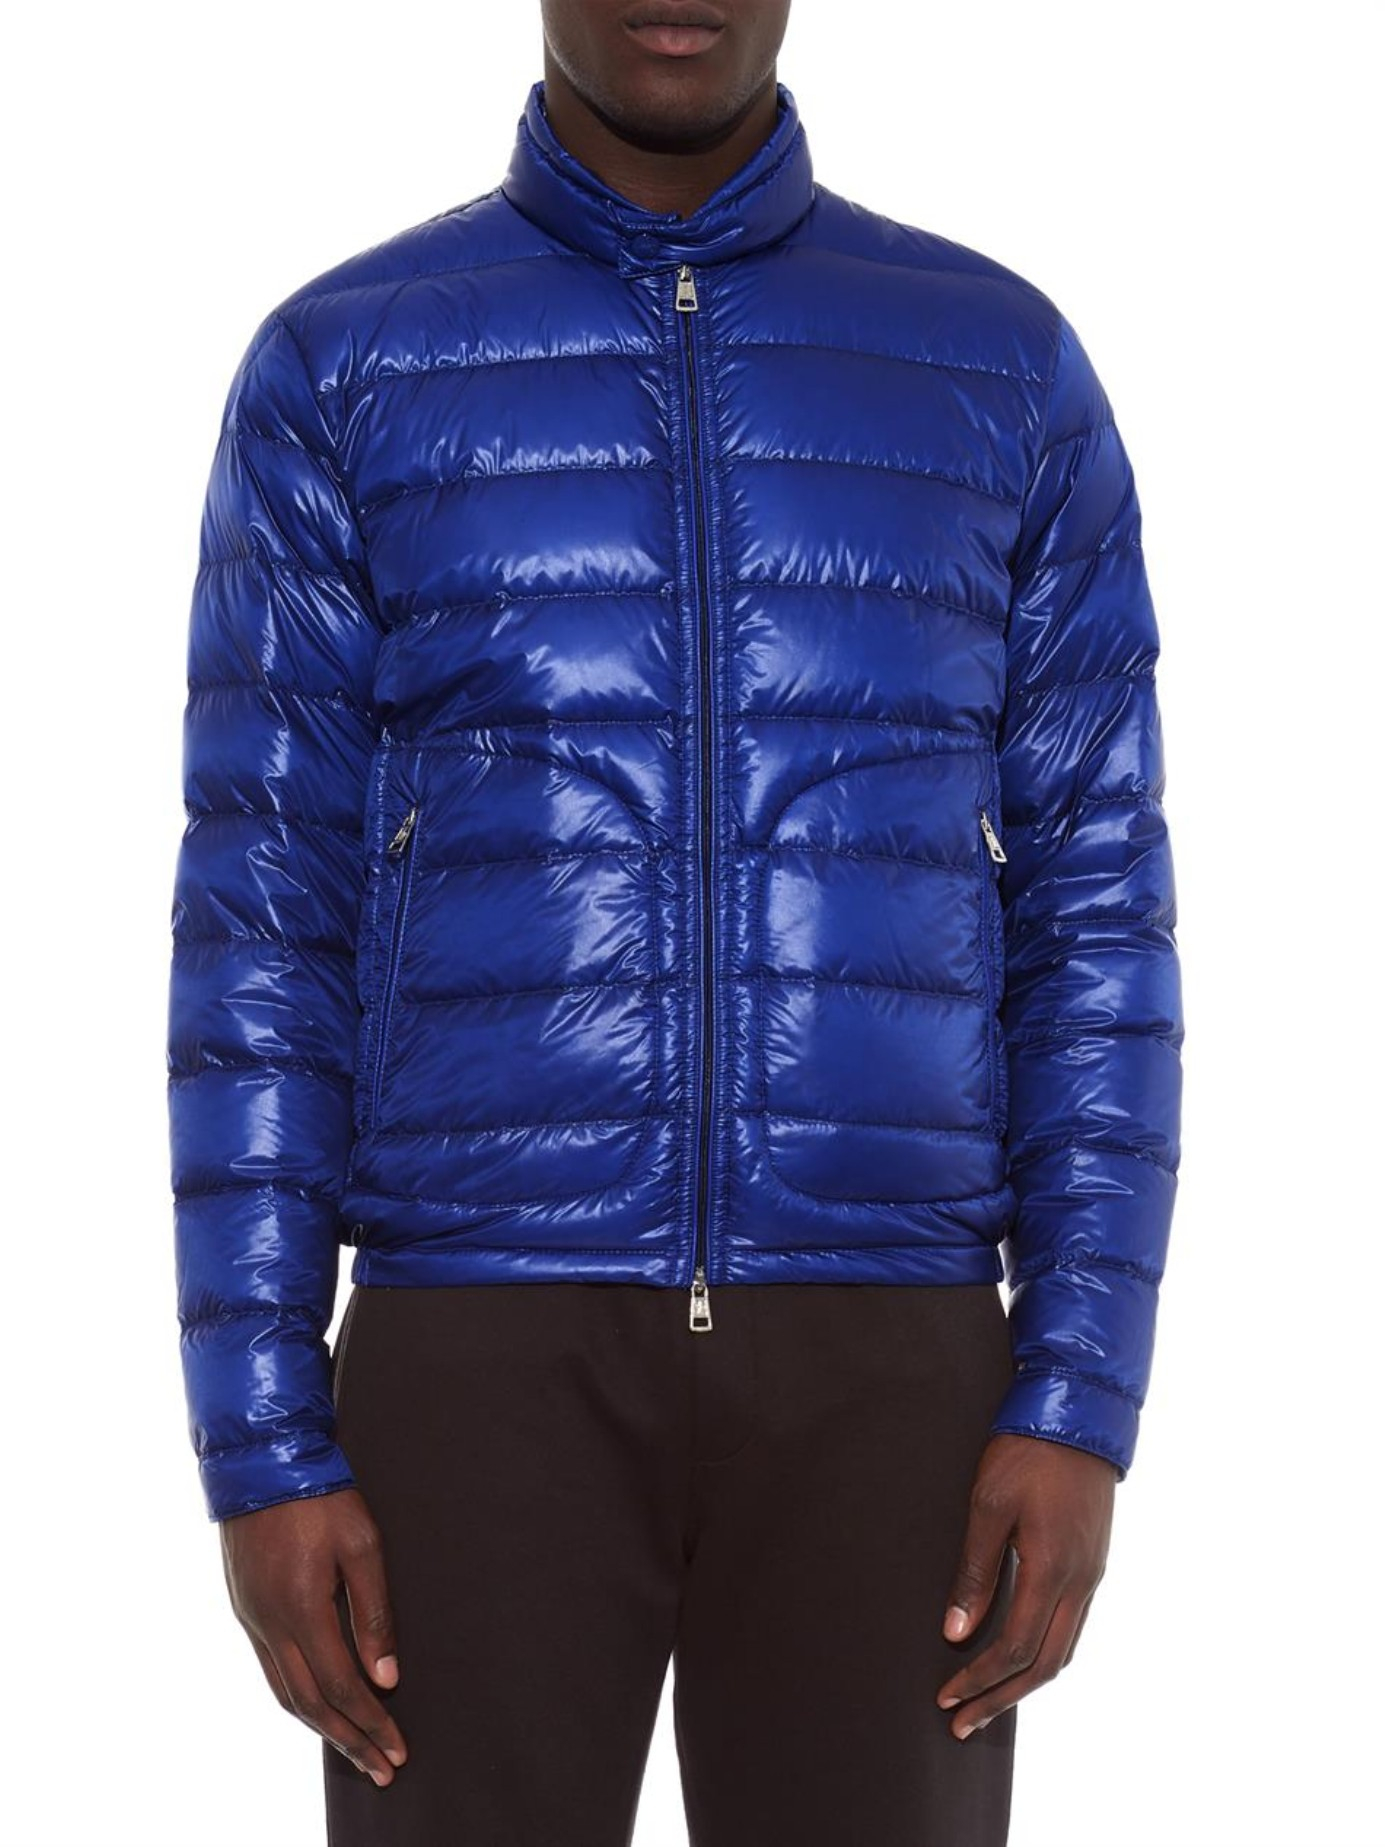 Lyst - Moncler Acorus Giubbotto Quilted Down Jacket in Blue for Men